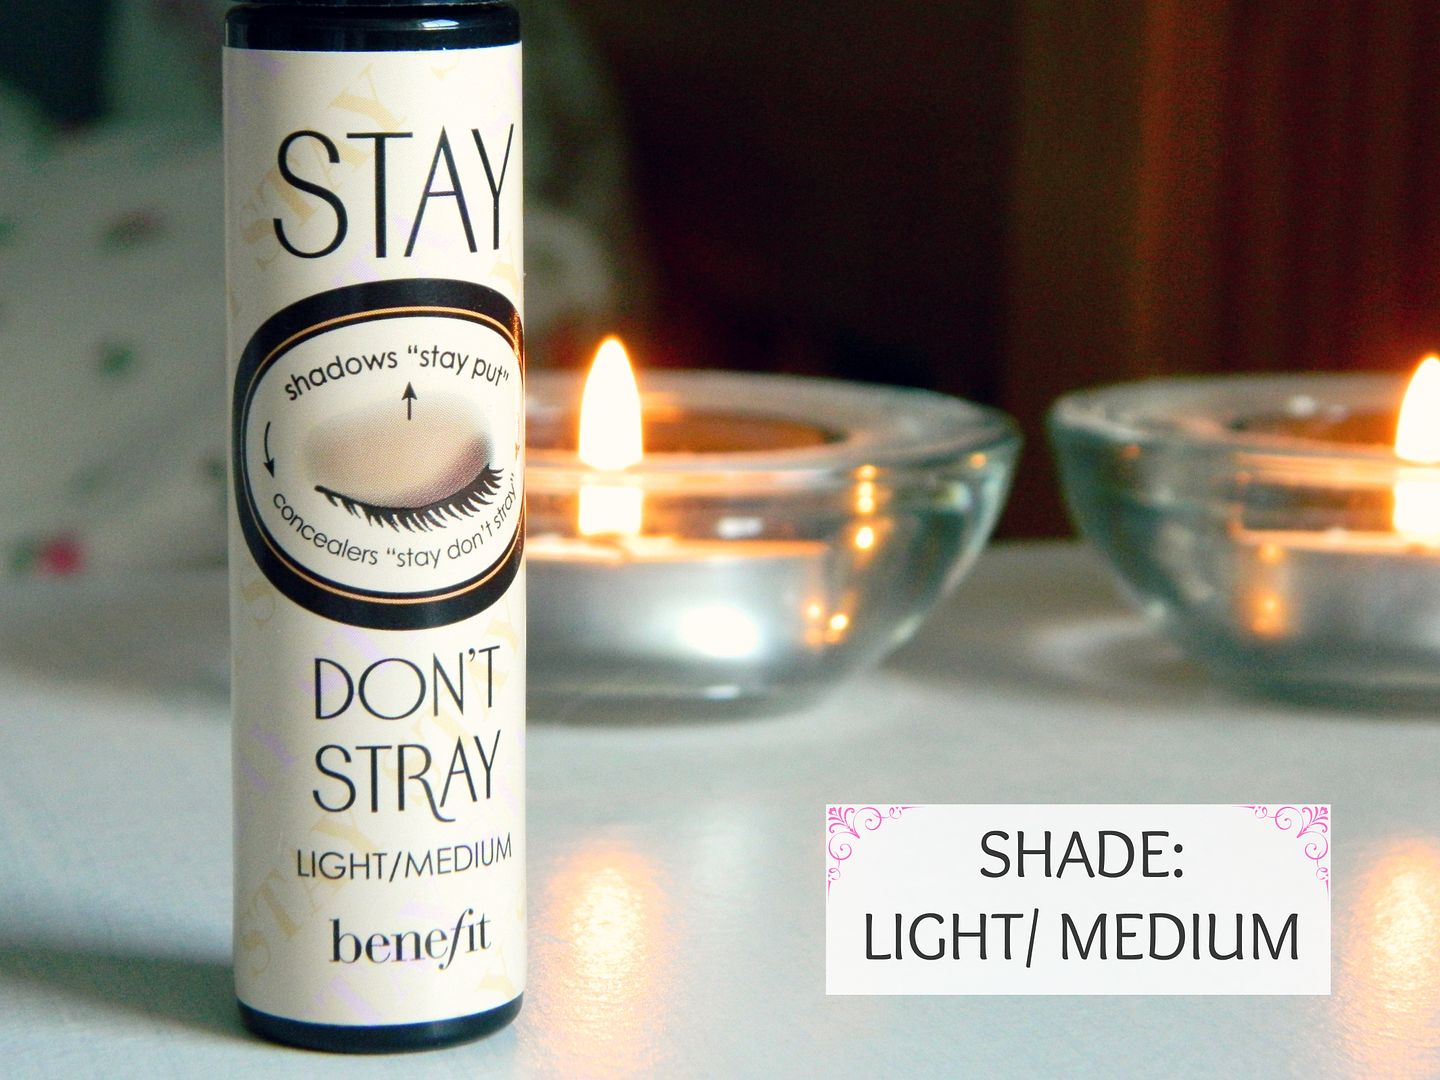 Benefit Stay Don't Stray Eye Shadow Concealer Primer Shade Light Medium Review Belle-amie UK Beauty Fashion Lifestyle Blog